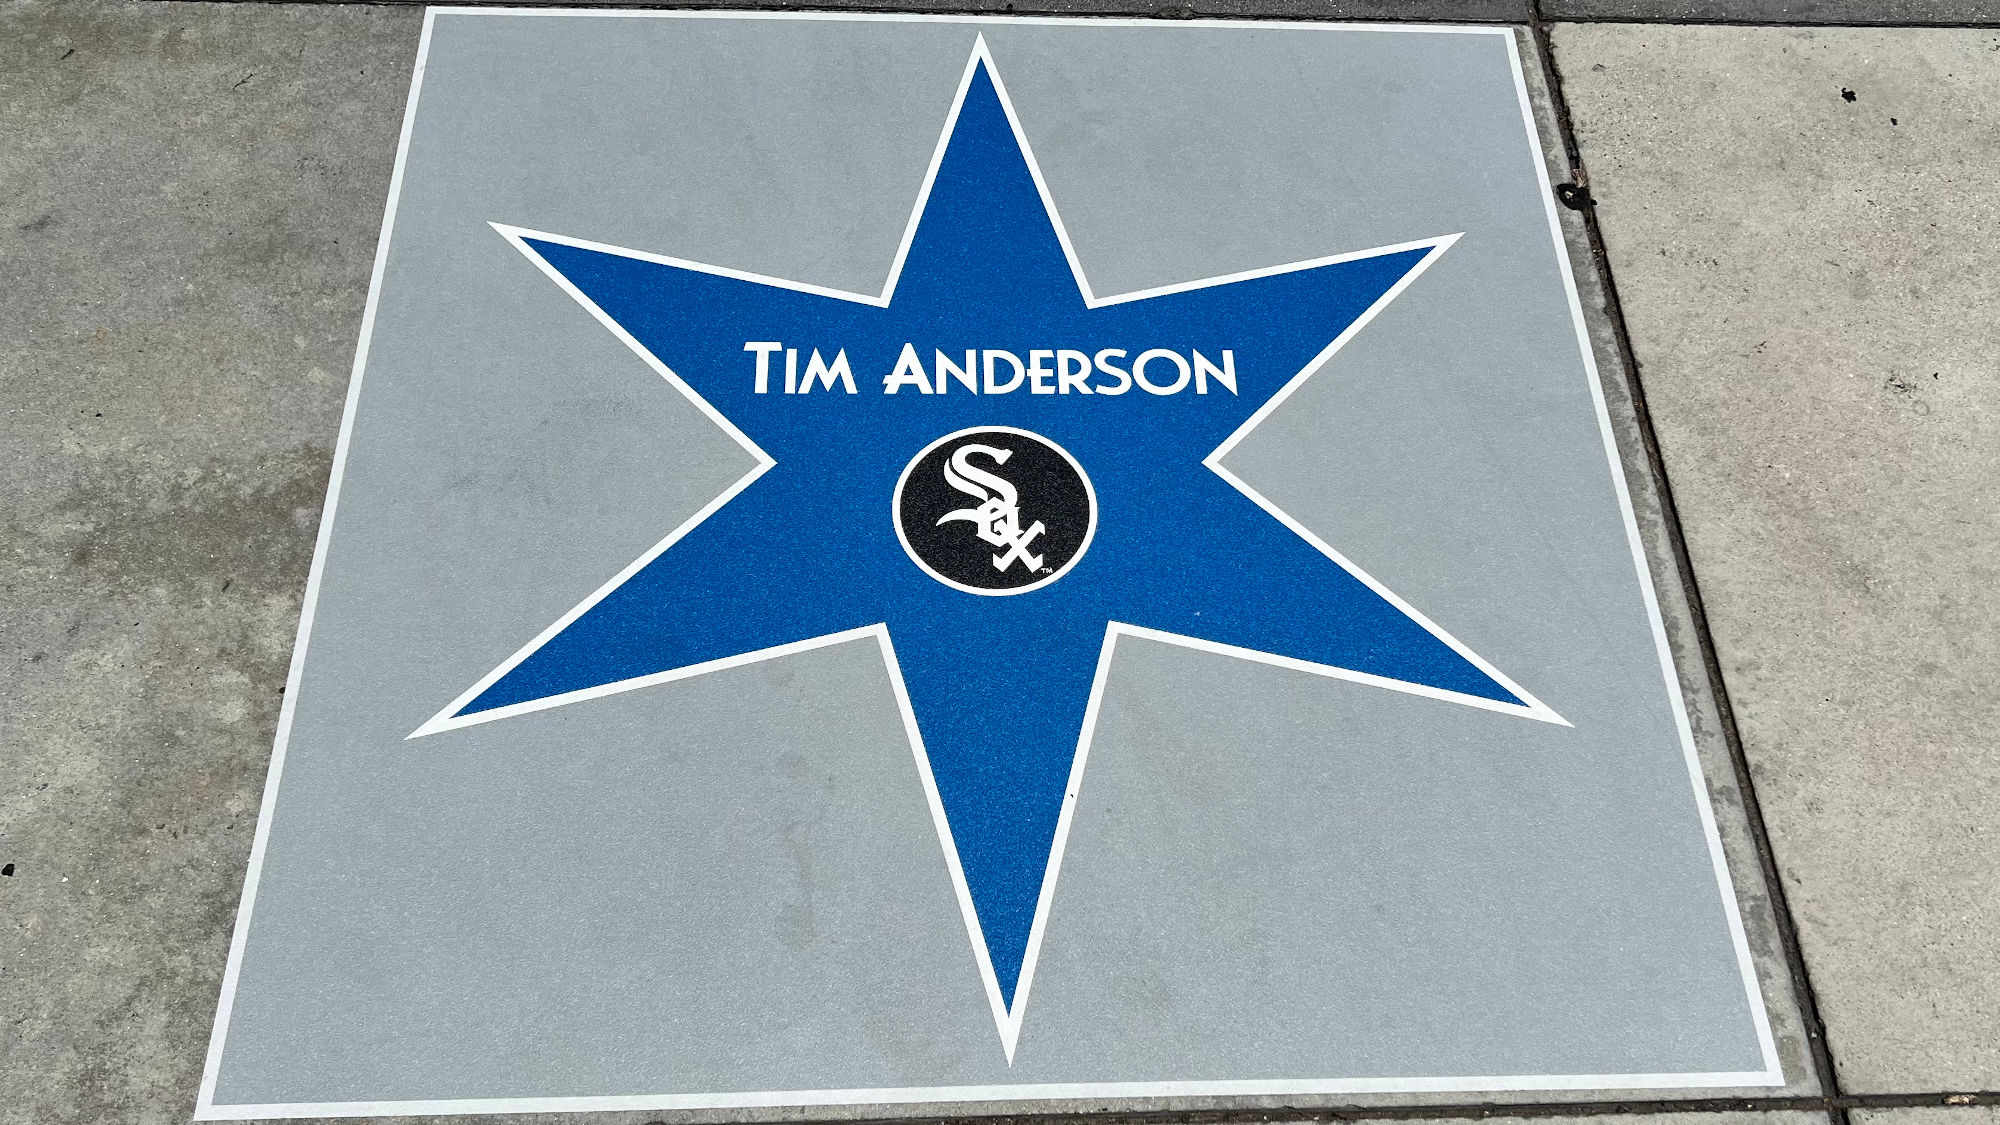 All Star Walk of Fame White Sox